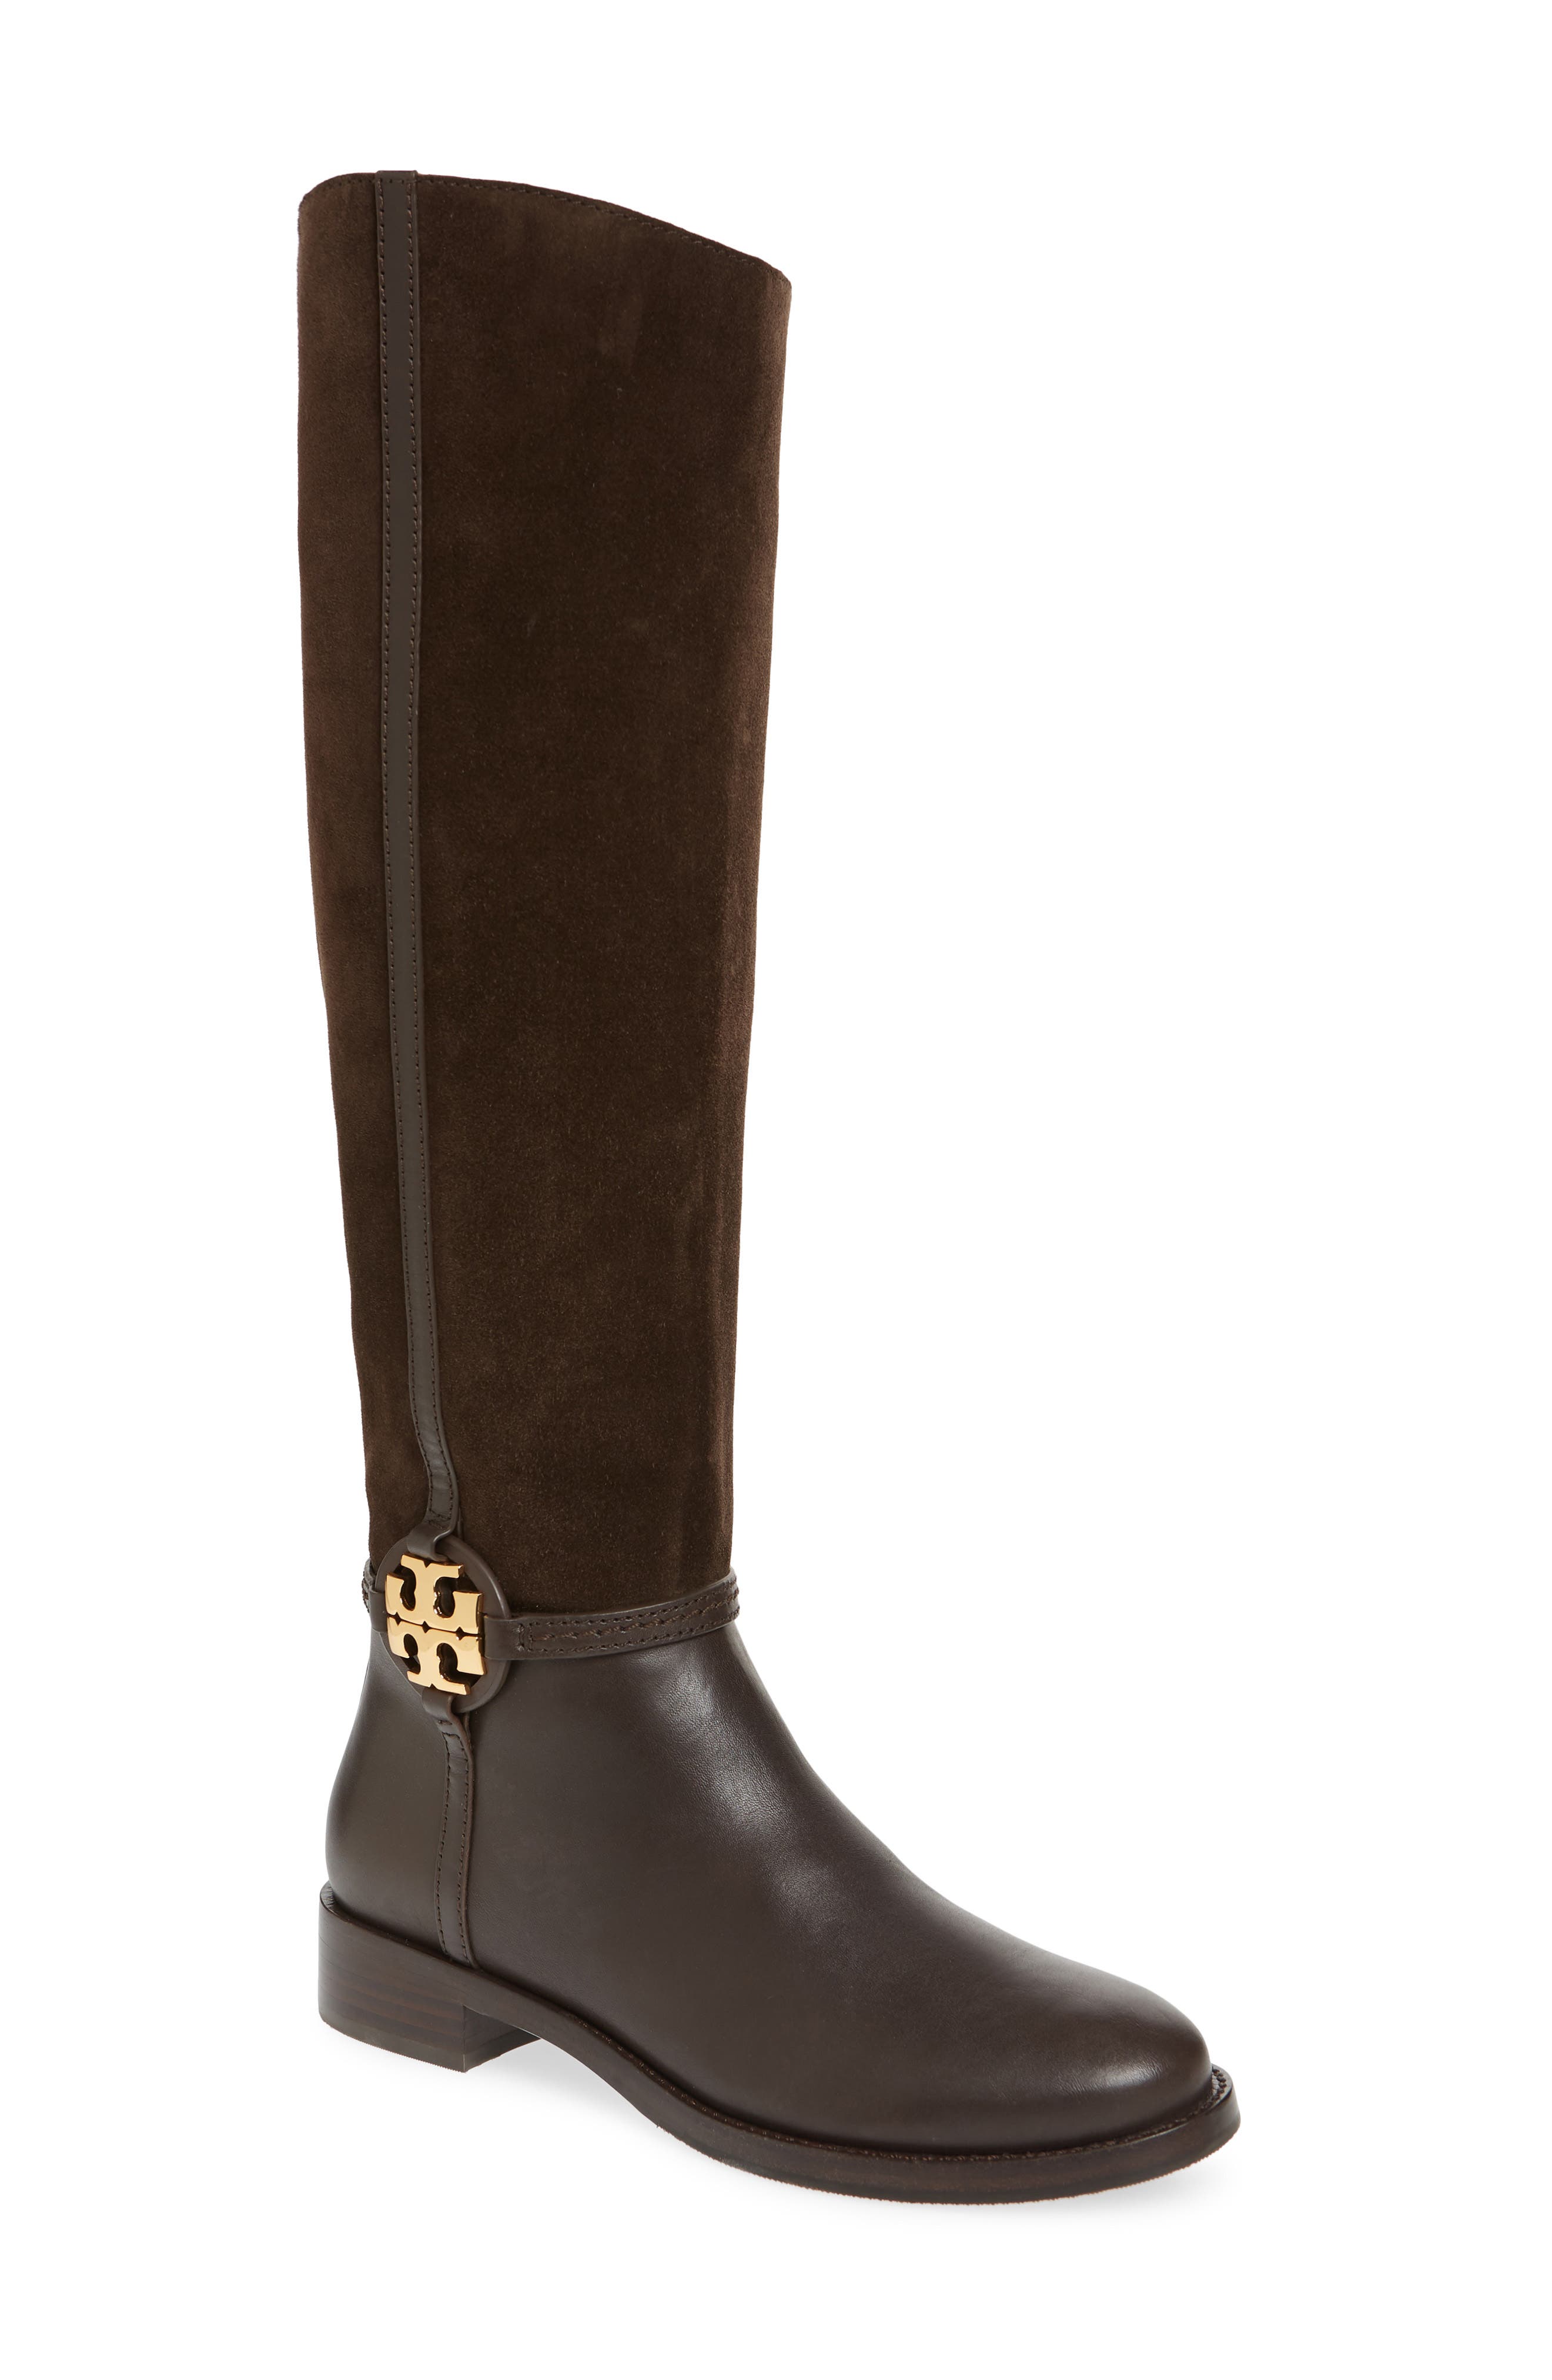 tory and burch boots